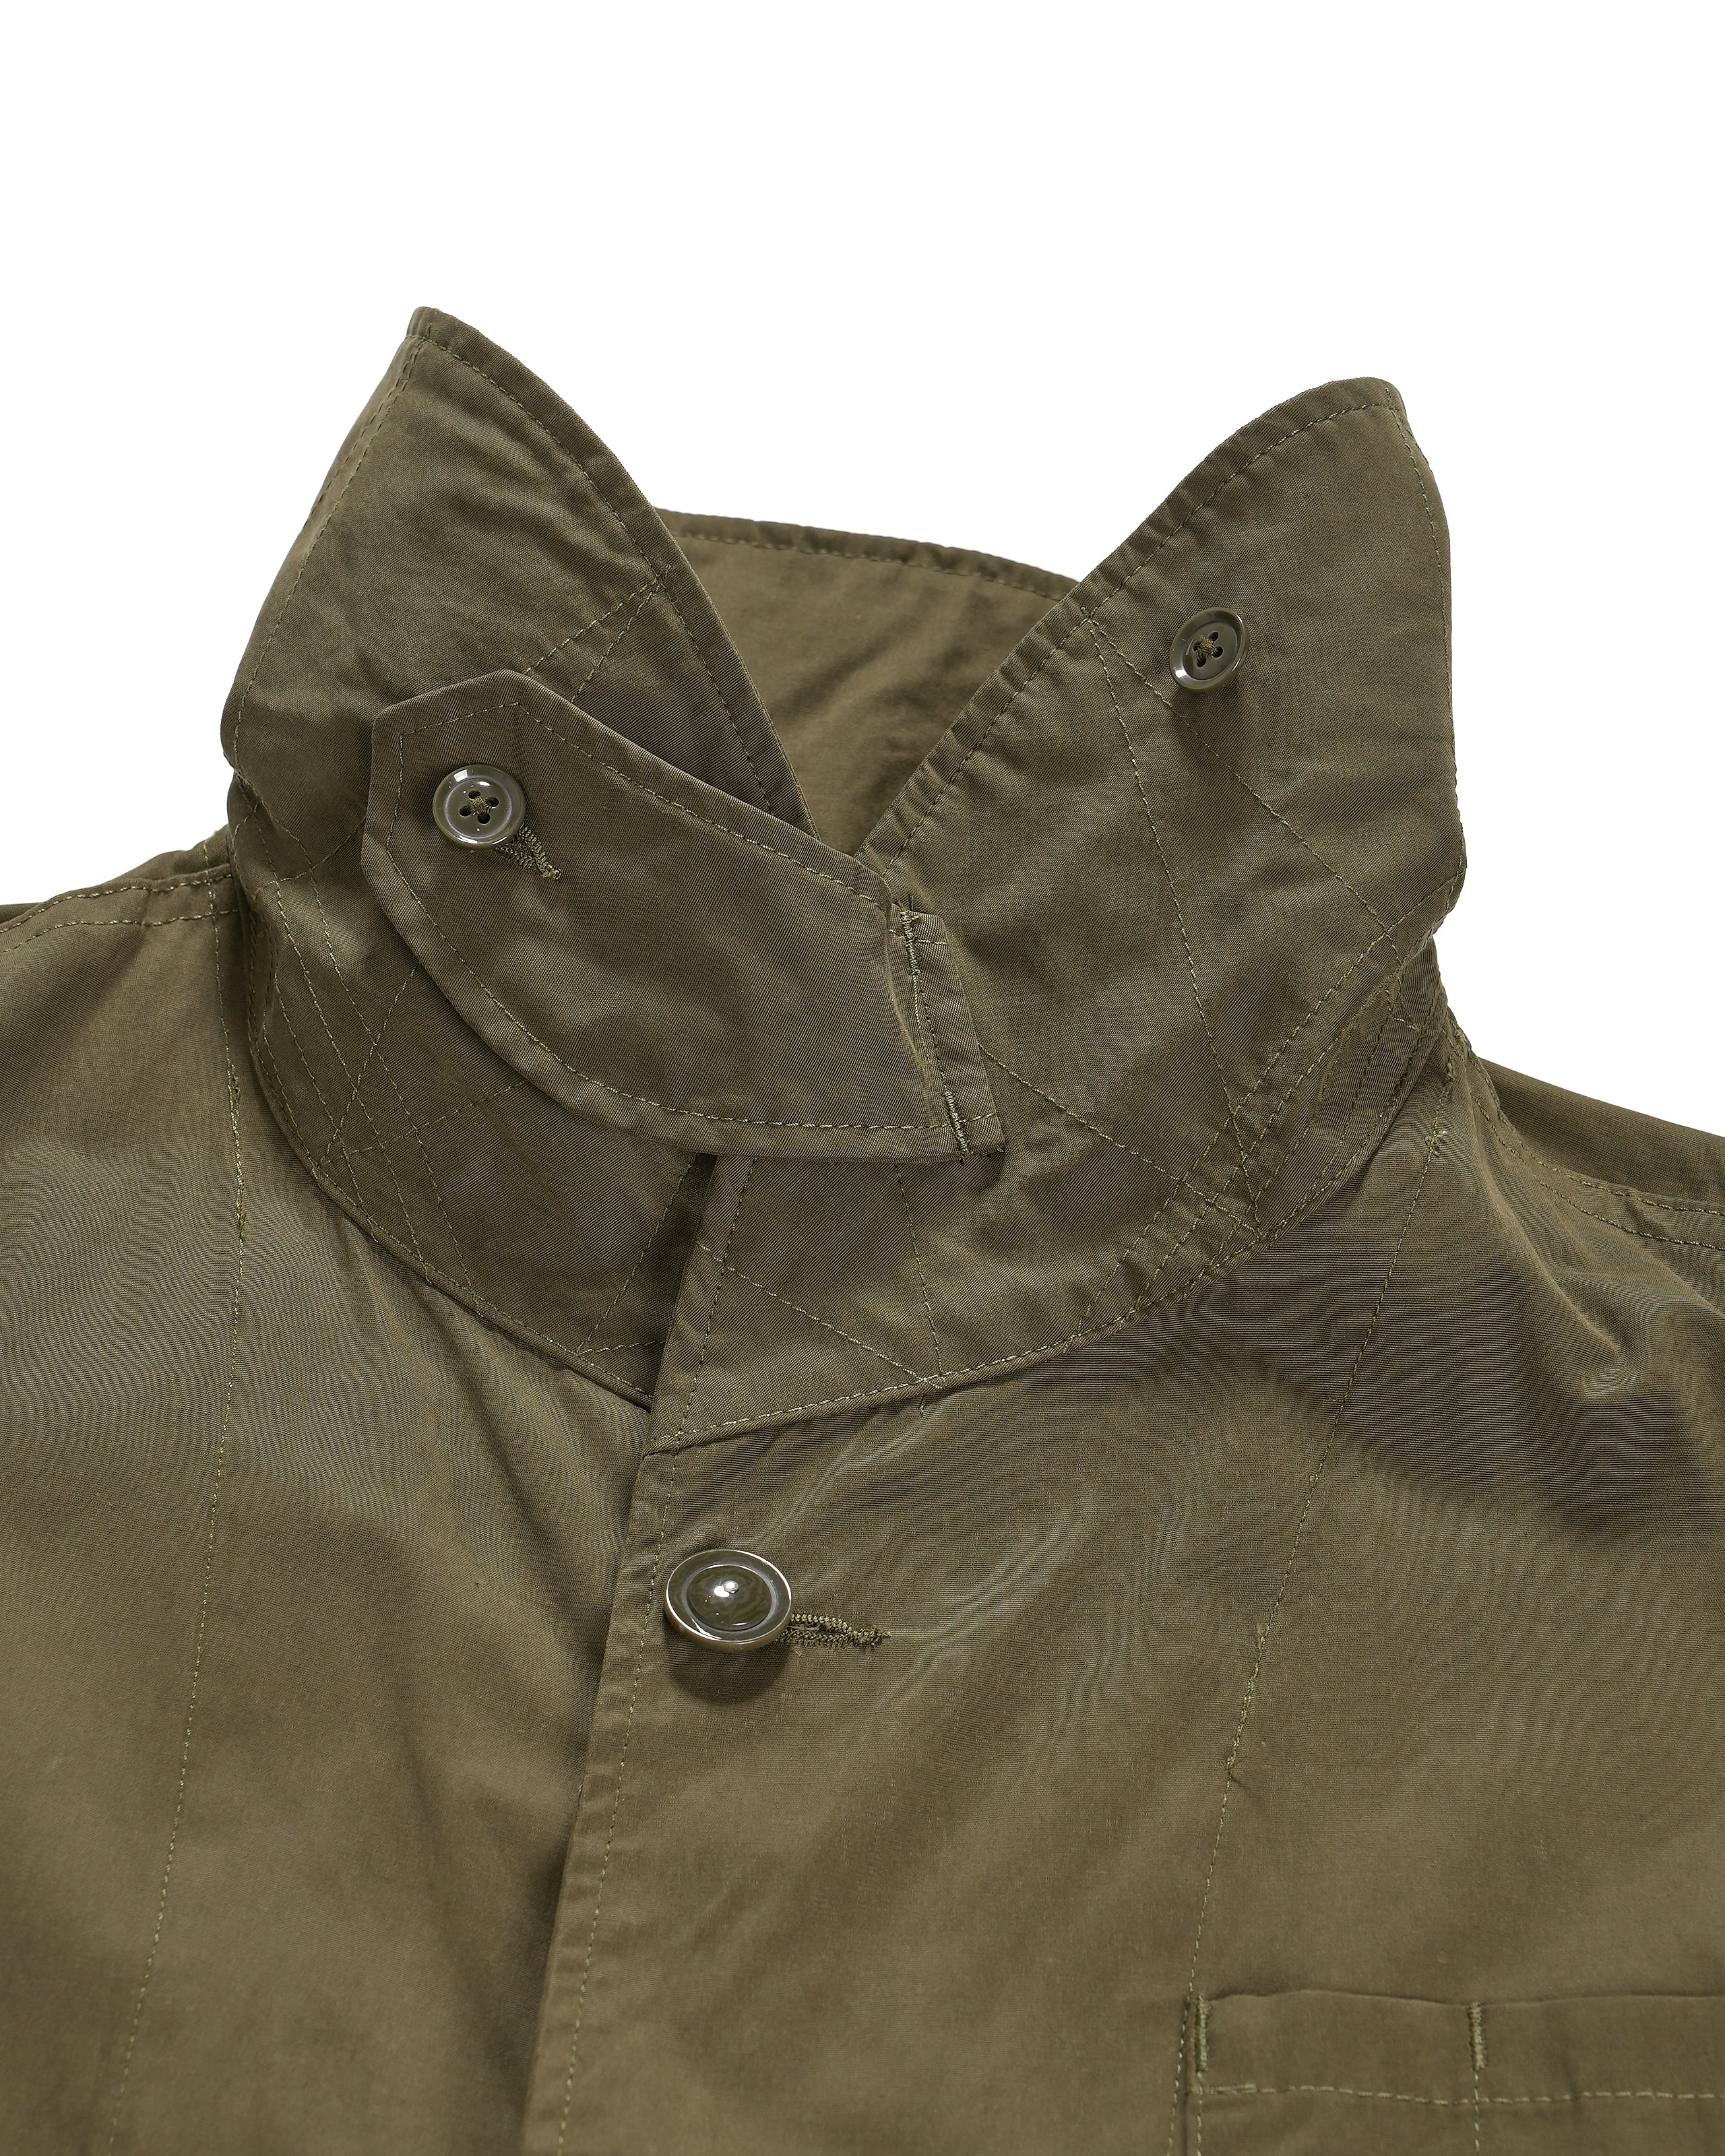 Maine Guide Jacket - Olive PC Coated Cloth